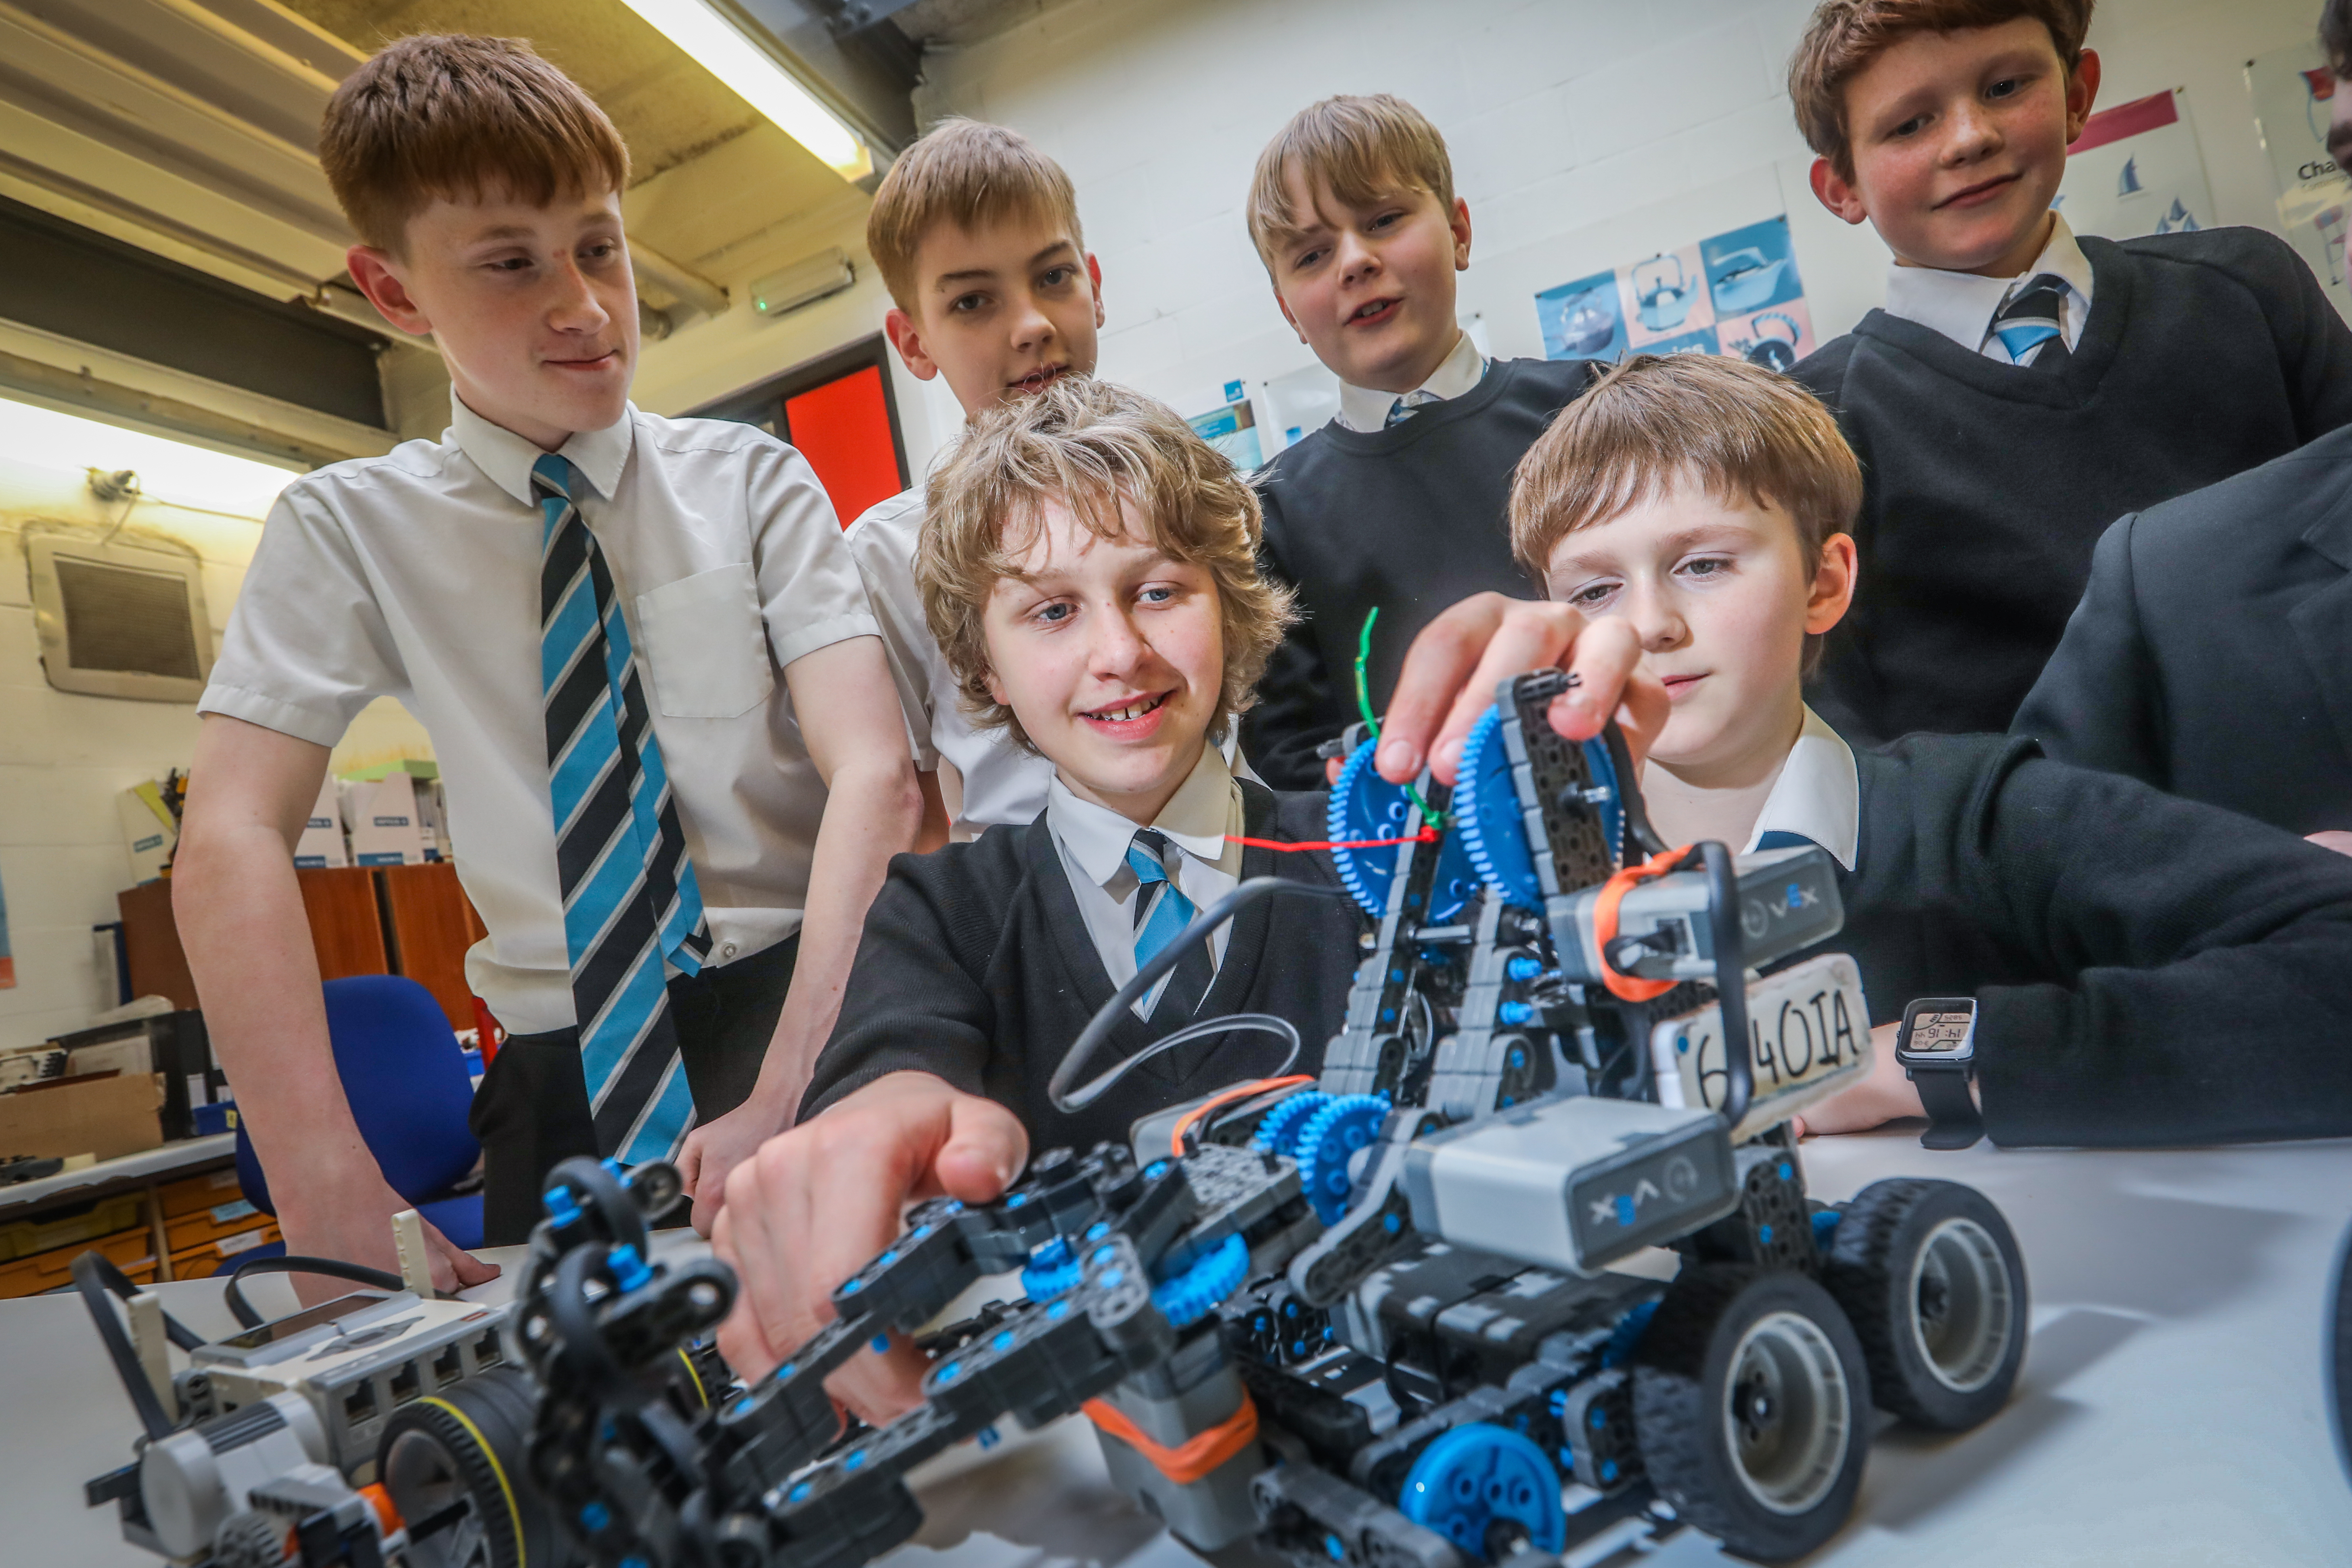 Monifieth High's Young Engineers Group were the top placed Scottish team in the VEX EVENT